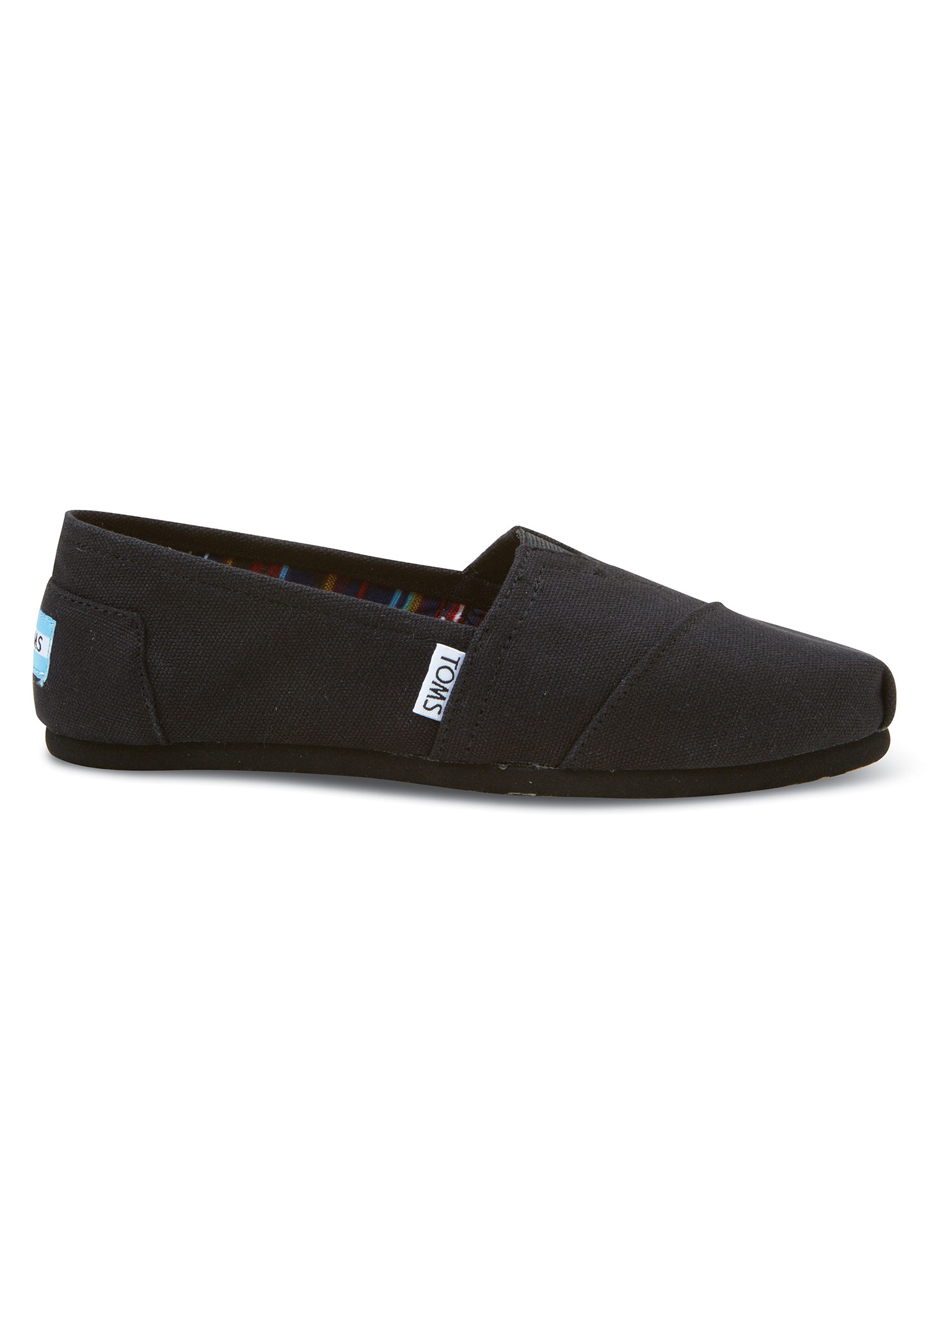 all black toms womens